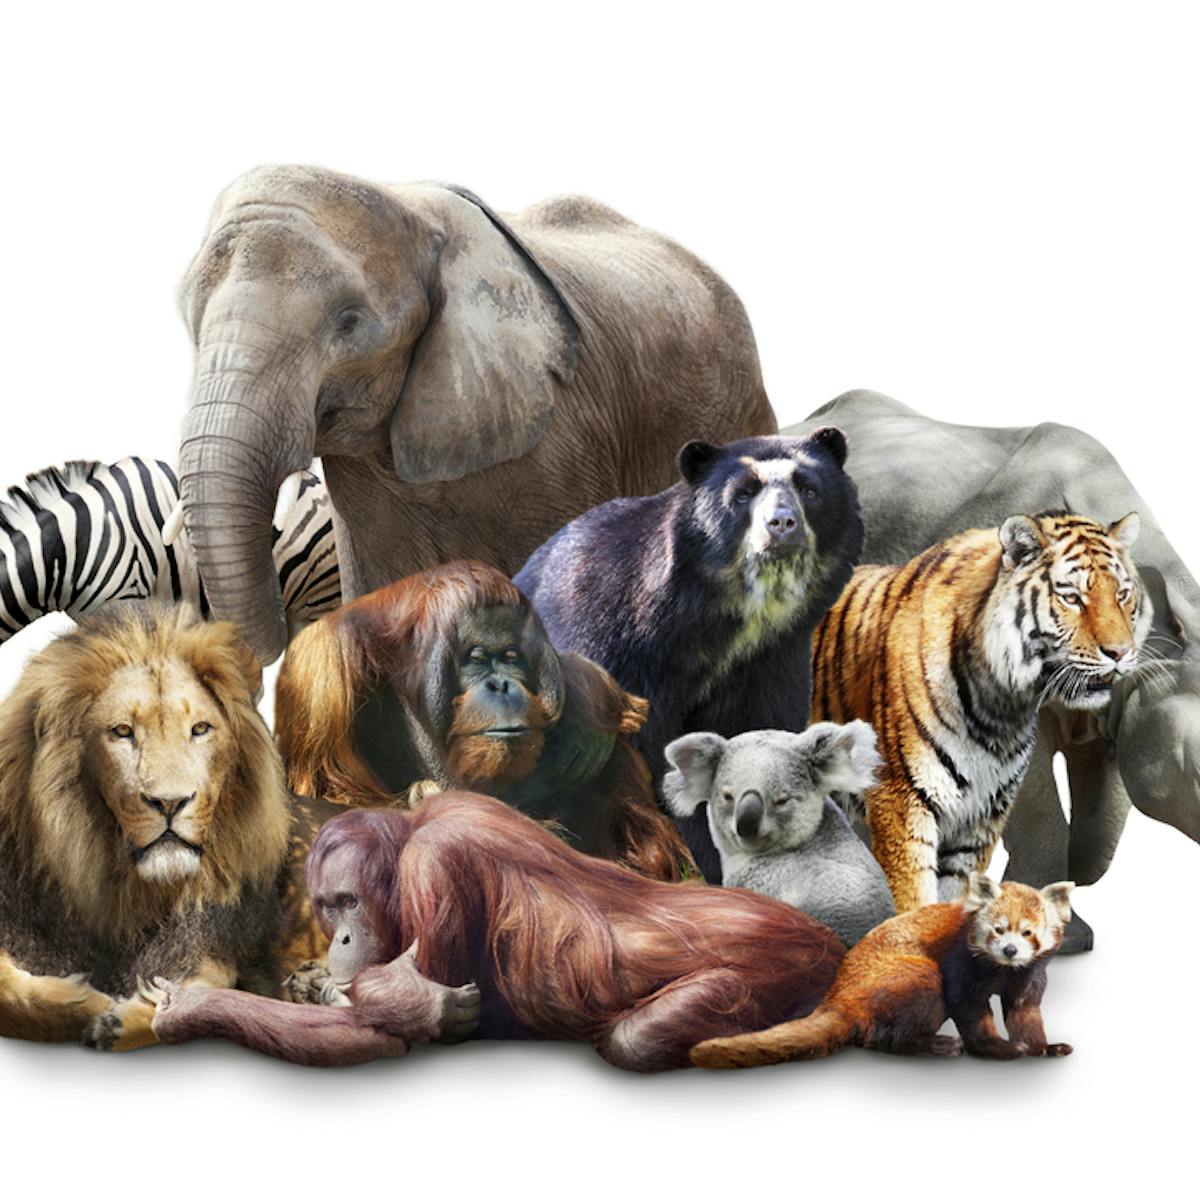 We're all mammals – so why do we look so different?